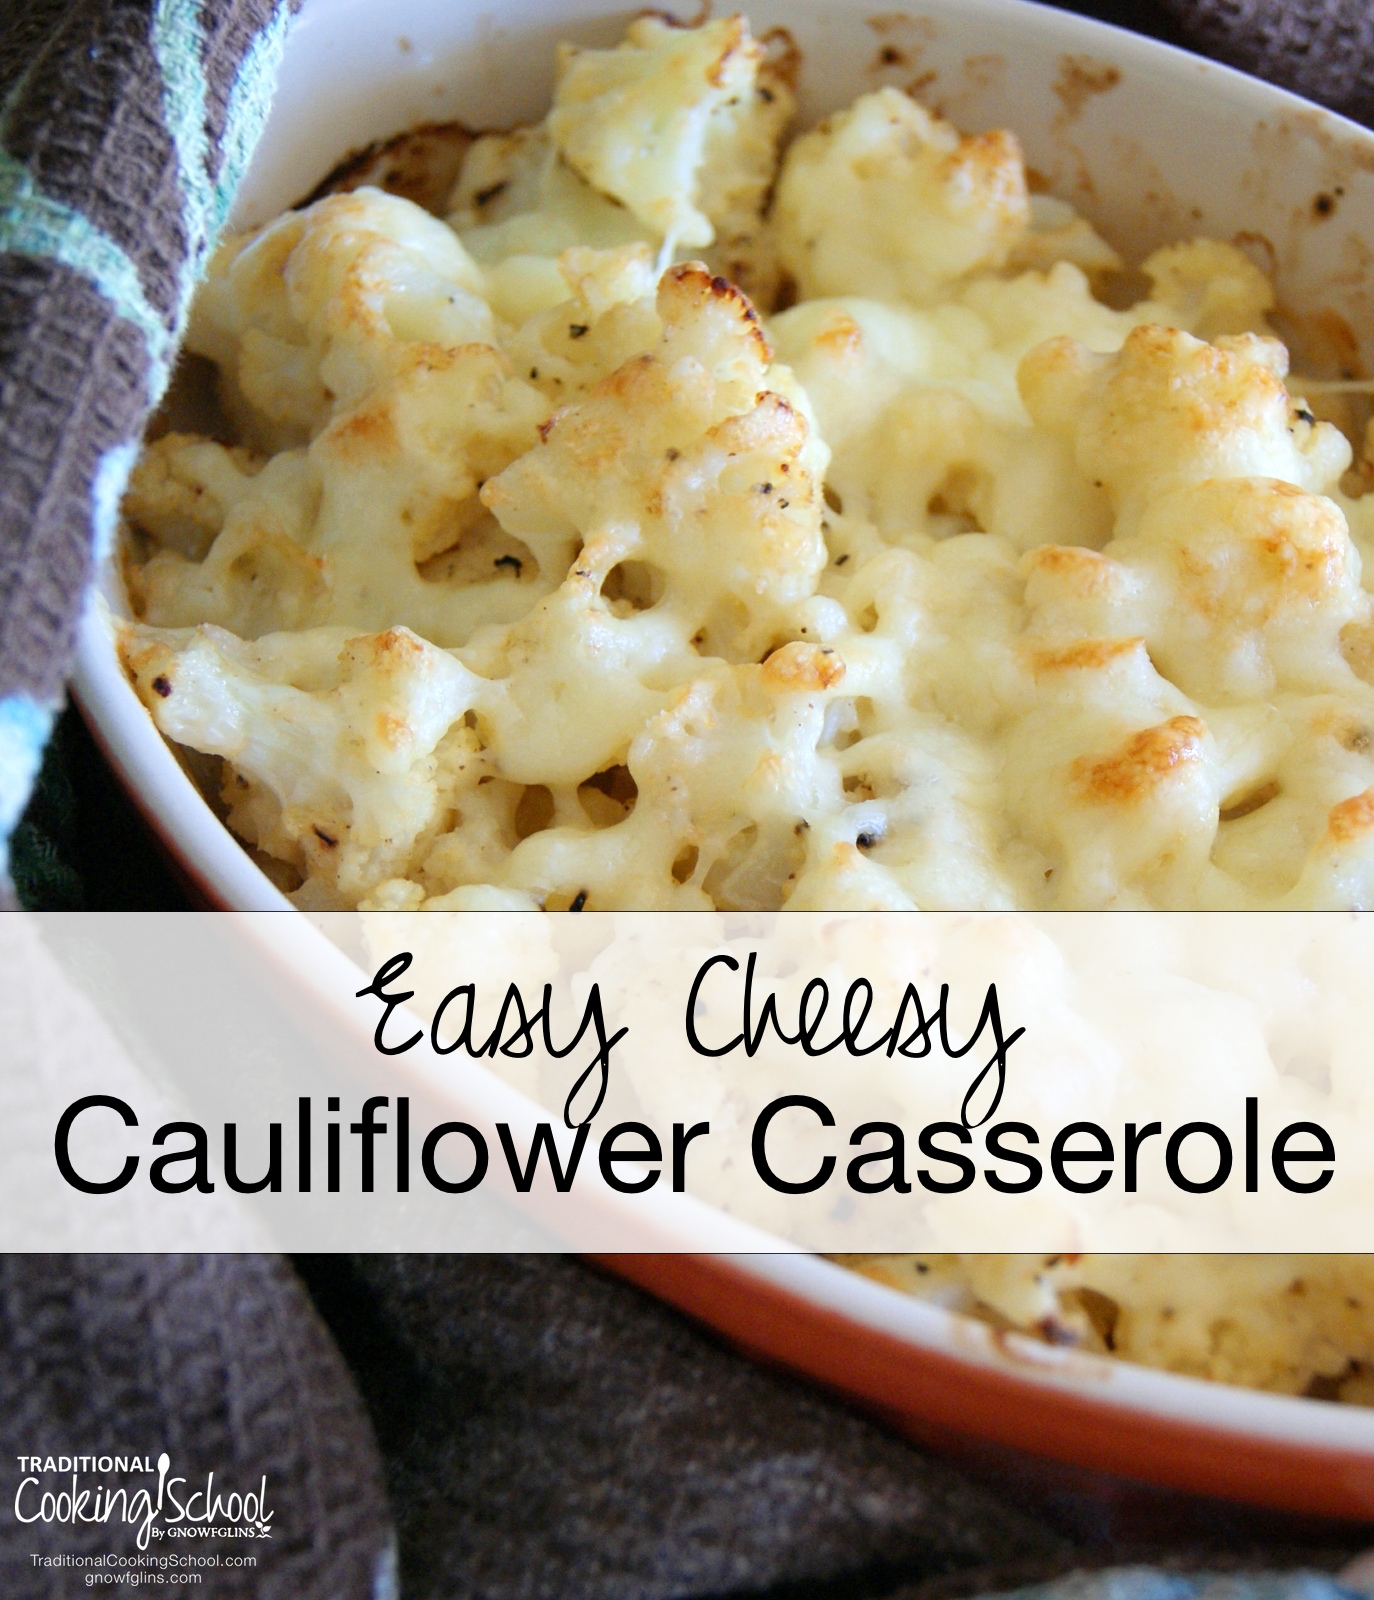 Easy Cheesy Cauliflower Casserole | Are you avoiding white potatoes? Will you miss the potato casseroles that are so typical of holiday meals? Try this versatile, tried-and-true family recipe! | TraditionalCookingSchool.com